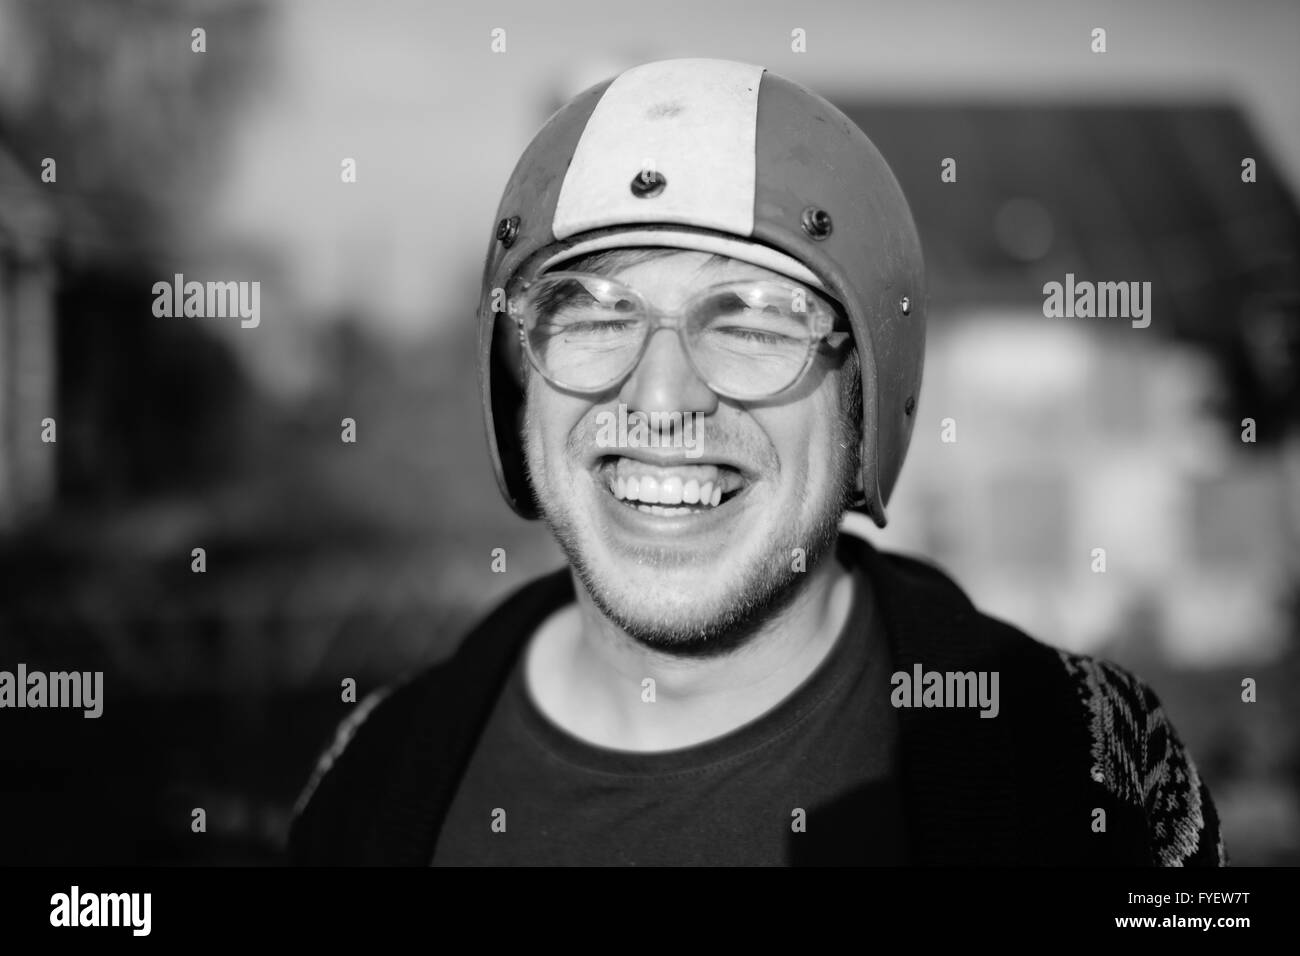 Happy smiling man in a helmet and glasses. Stock Photo